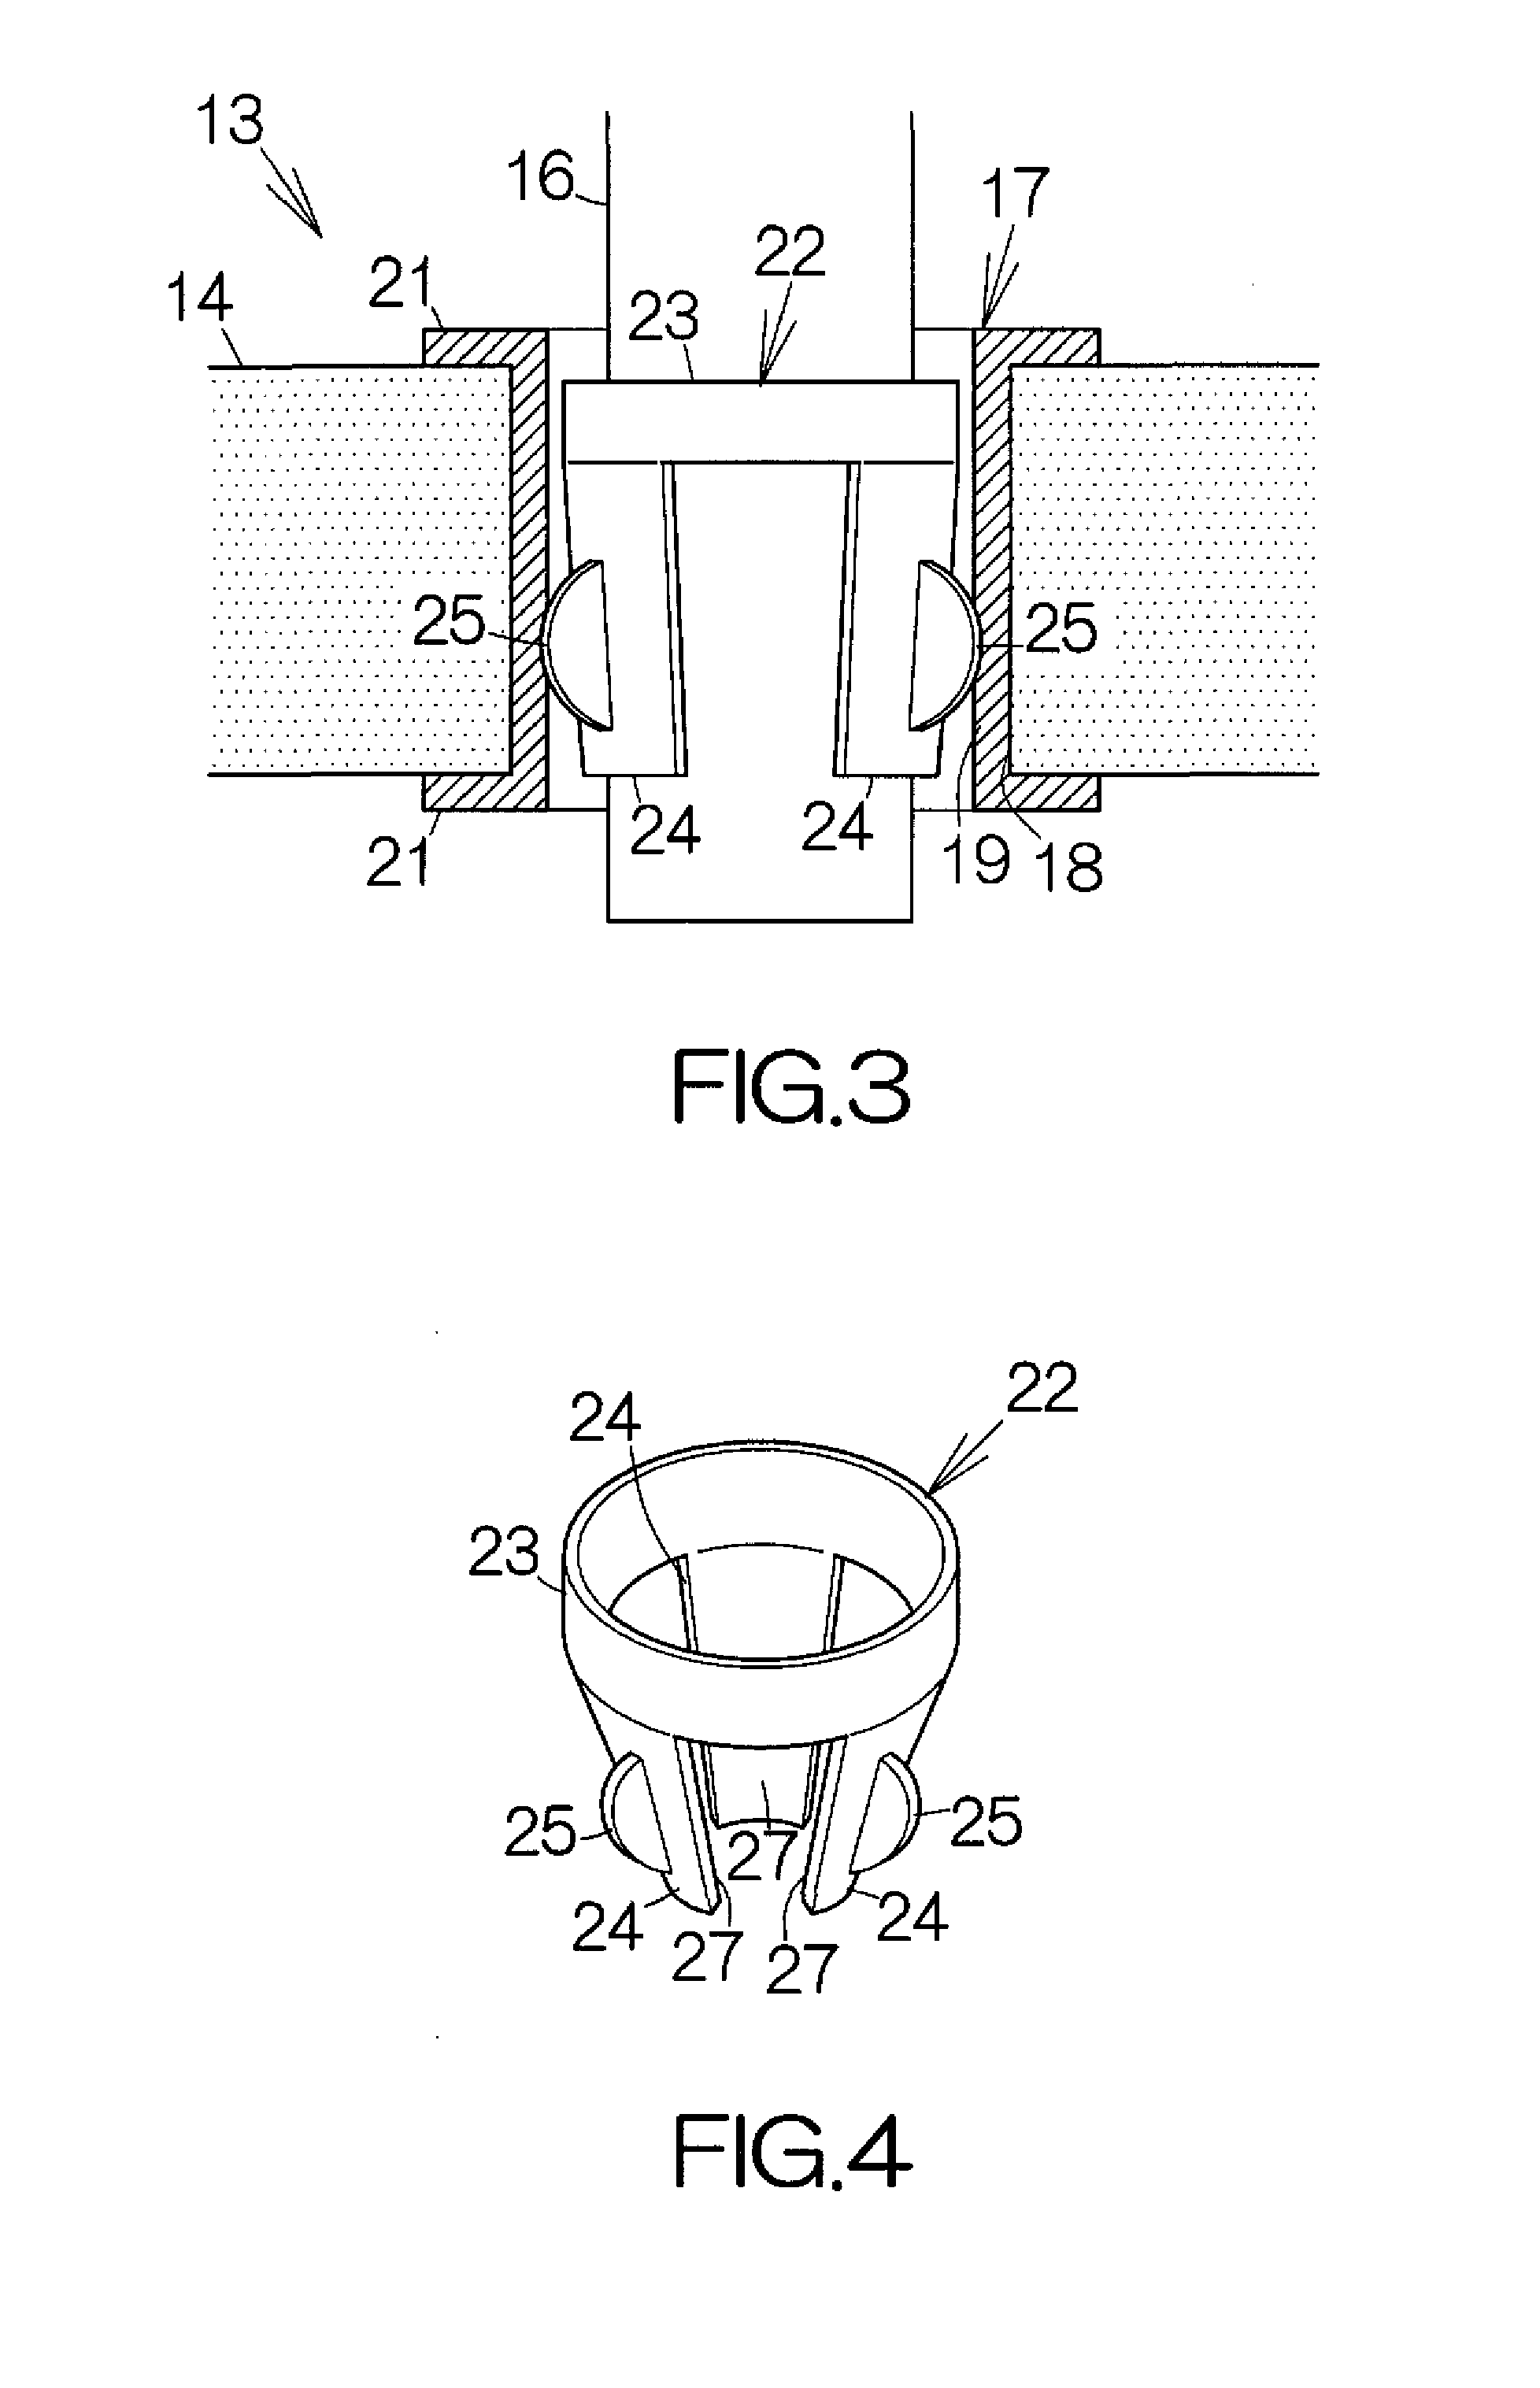 Connecting terminal for receiving lead terminal in printed wiring board